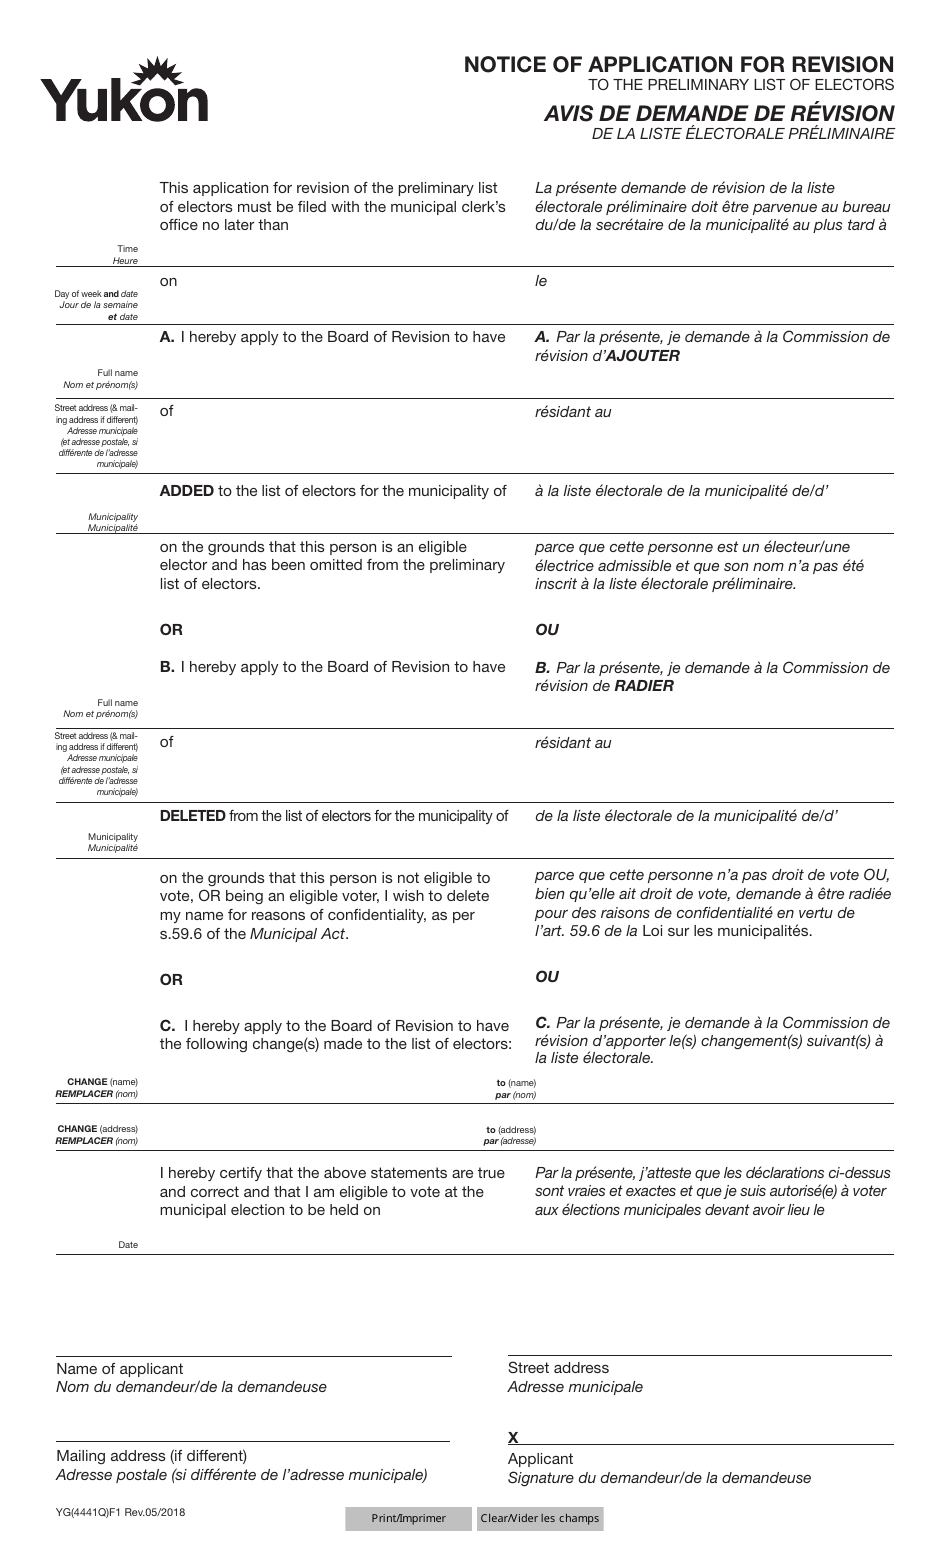 Form YG4441 Notice of Application for Revision - Yukon, Canada (English / French), Page 1